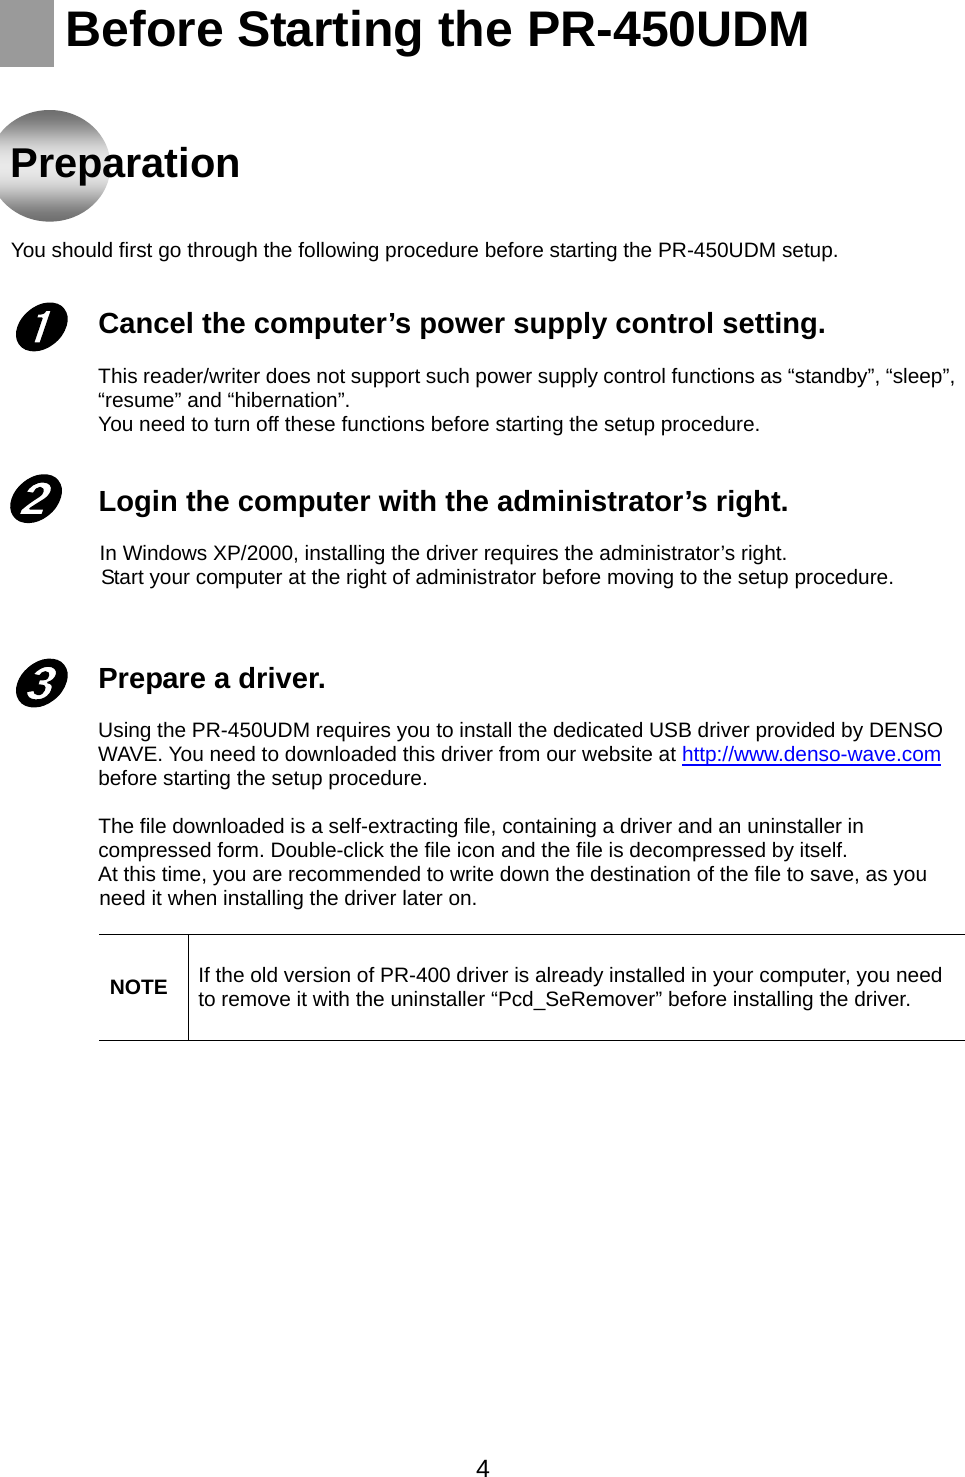    Before Starting the PR-450UDM    Preparation      You should first go through the following procedure before starting the PR-450UDM setup.   Cancel the computer’s power supply control setting.    This reader/writer does not support such power supply control functions as “standby”, “sleep”, “resume” and “hibernation”.   You need to turn off these functions before starting the setup procedure.     Login the computer with the administrator’s right.    ➊ ➋ In Windows XP/2000, installing the driver requires the administrator’s right.   Start your computer at the right of administrator before moving to the setup procedure.    Prepare a driver.  ➌ Using the PR-450UDM requires you to install the dedicated USB driver provided by DENSO WAVE. You need to downloaded this driver from our website at http://www.denso-wave.com before starting the setup procedure.  The file downloaded is a self-extracting file, containing a driver and an uninstaller in compressed form. Double-click the file icon and the file is decompressed by itself. At this time, you are recommended to write down the destination of the file to save, as you need it when installing the driver later on.            NOTE  If the old version of PR-400 driver is already installed in your computer, you need to remove it with the uninstaller “Pcd_SeRemover” before installing the driver.        4